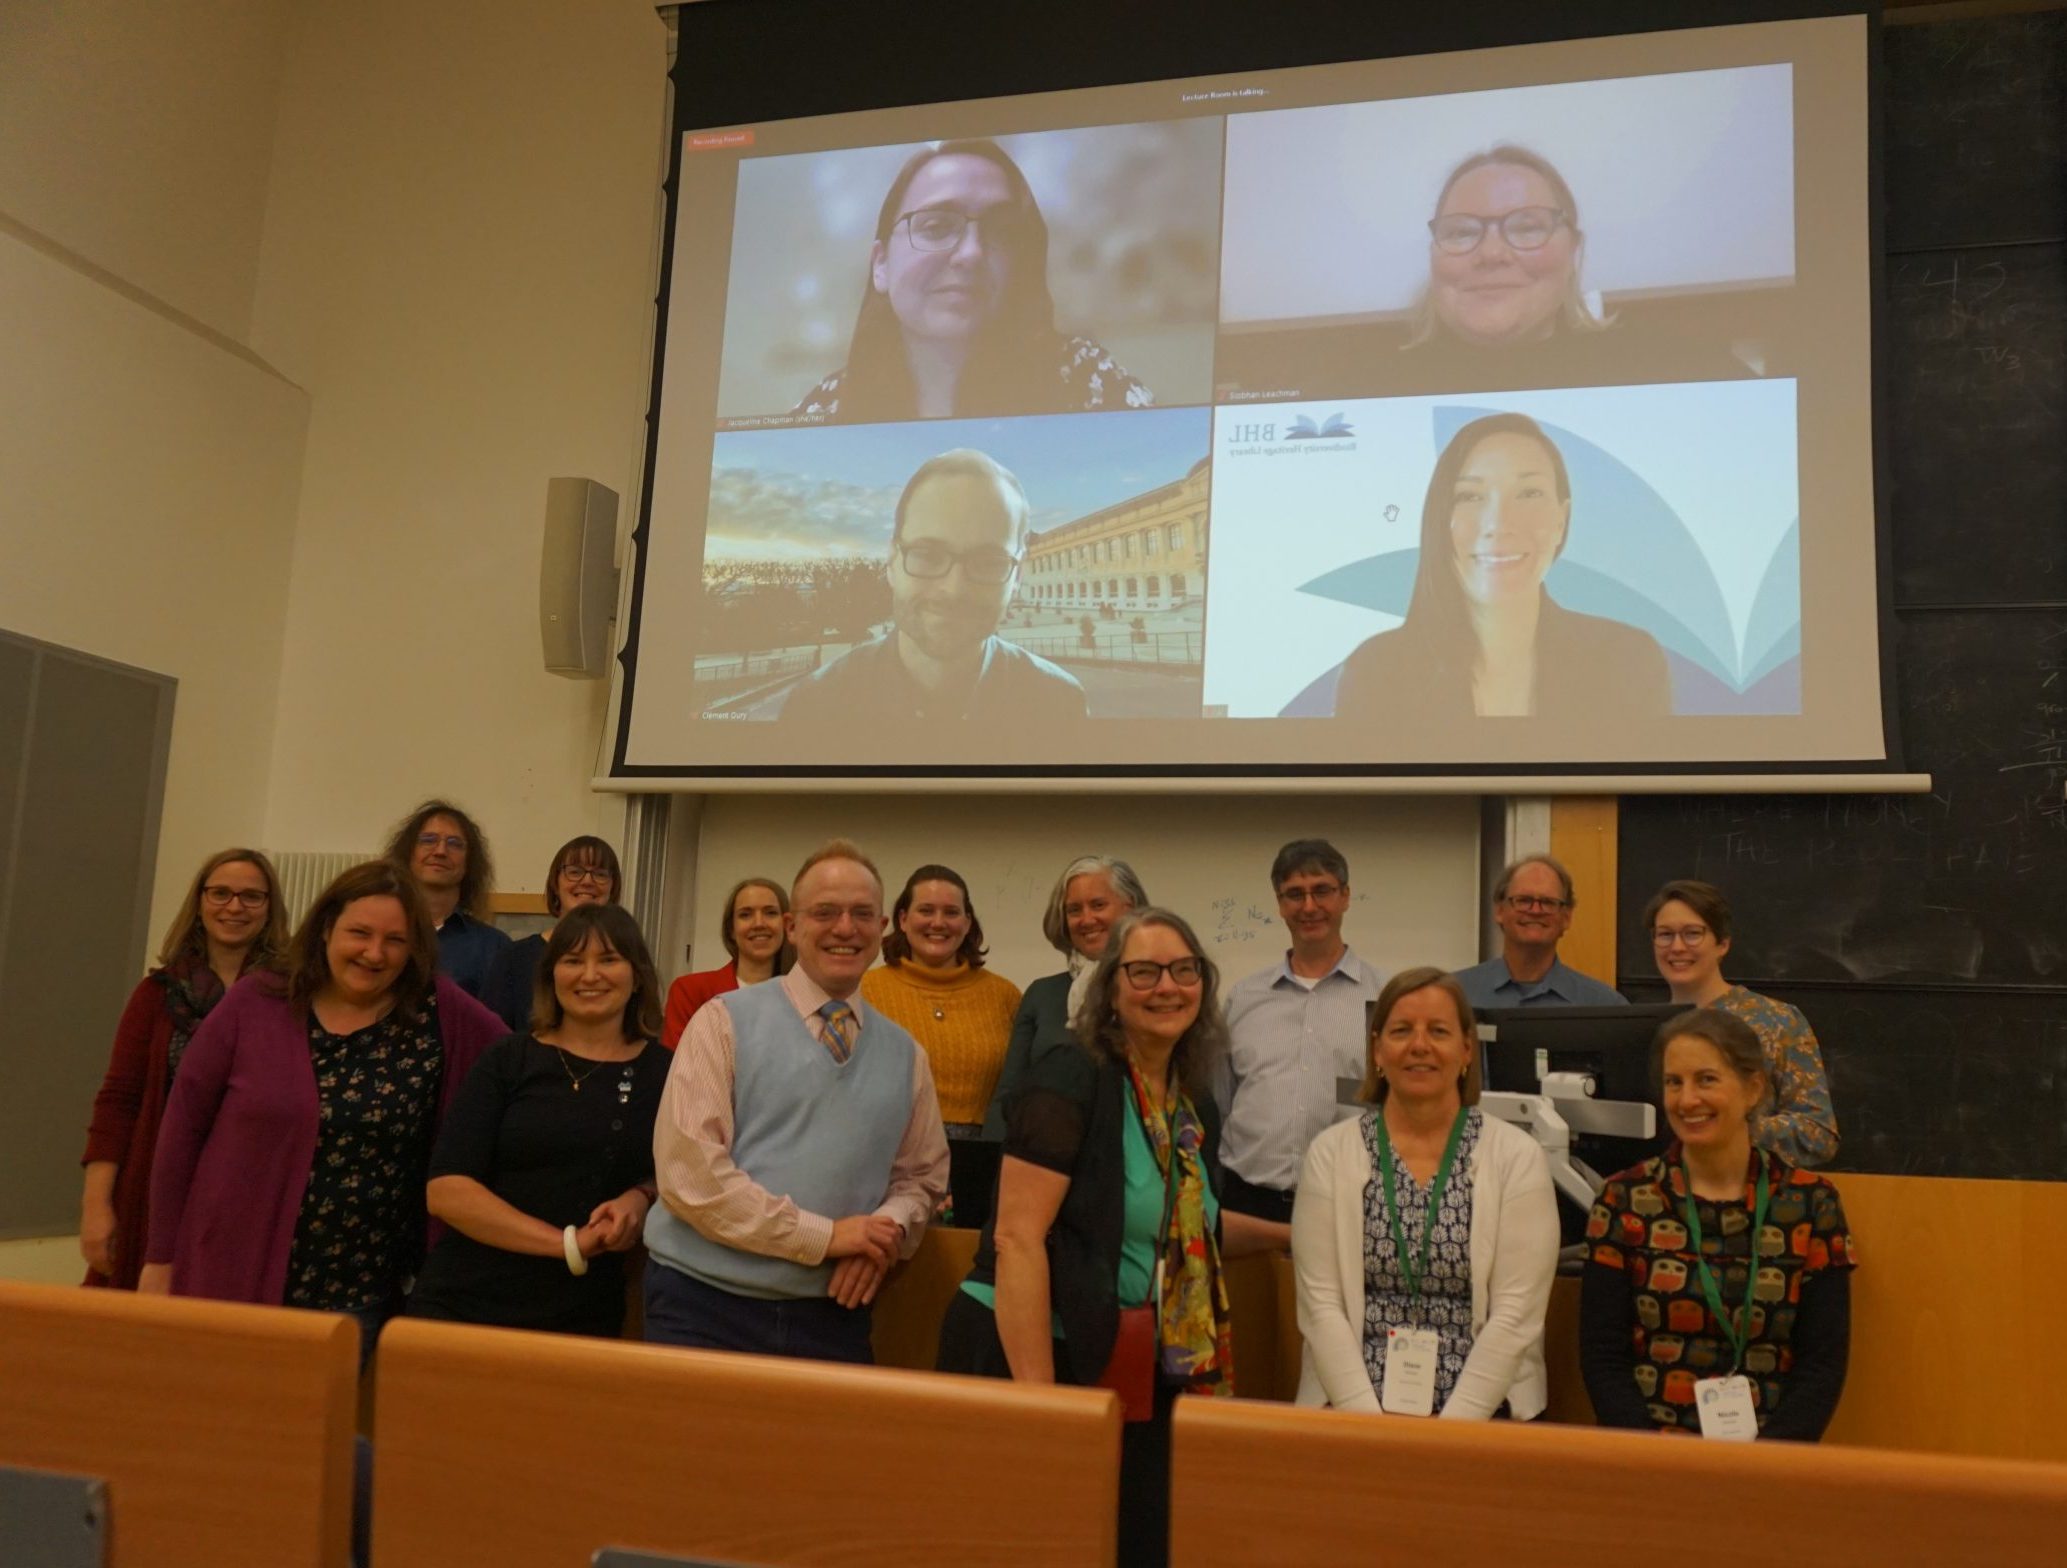 A group of conference attendees pose for a group photo in front of a projection screen with virtual attendees on screen